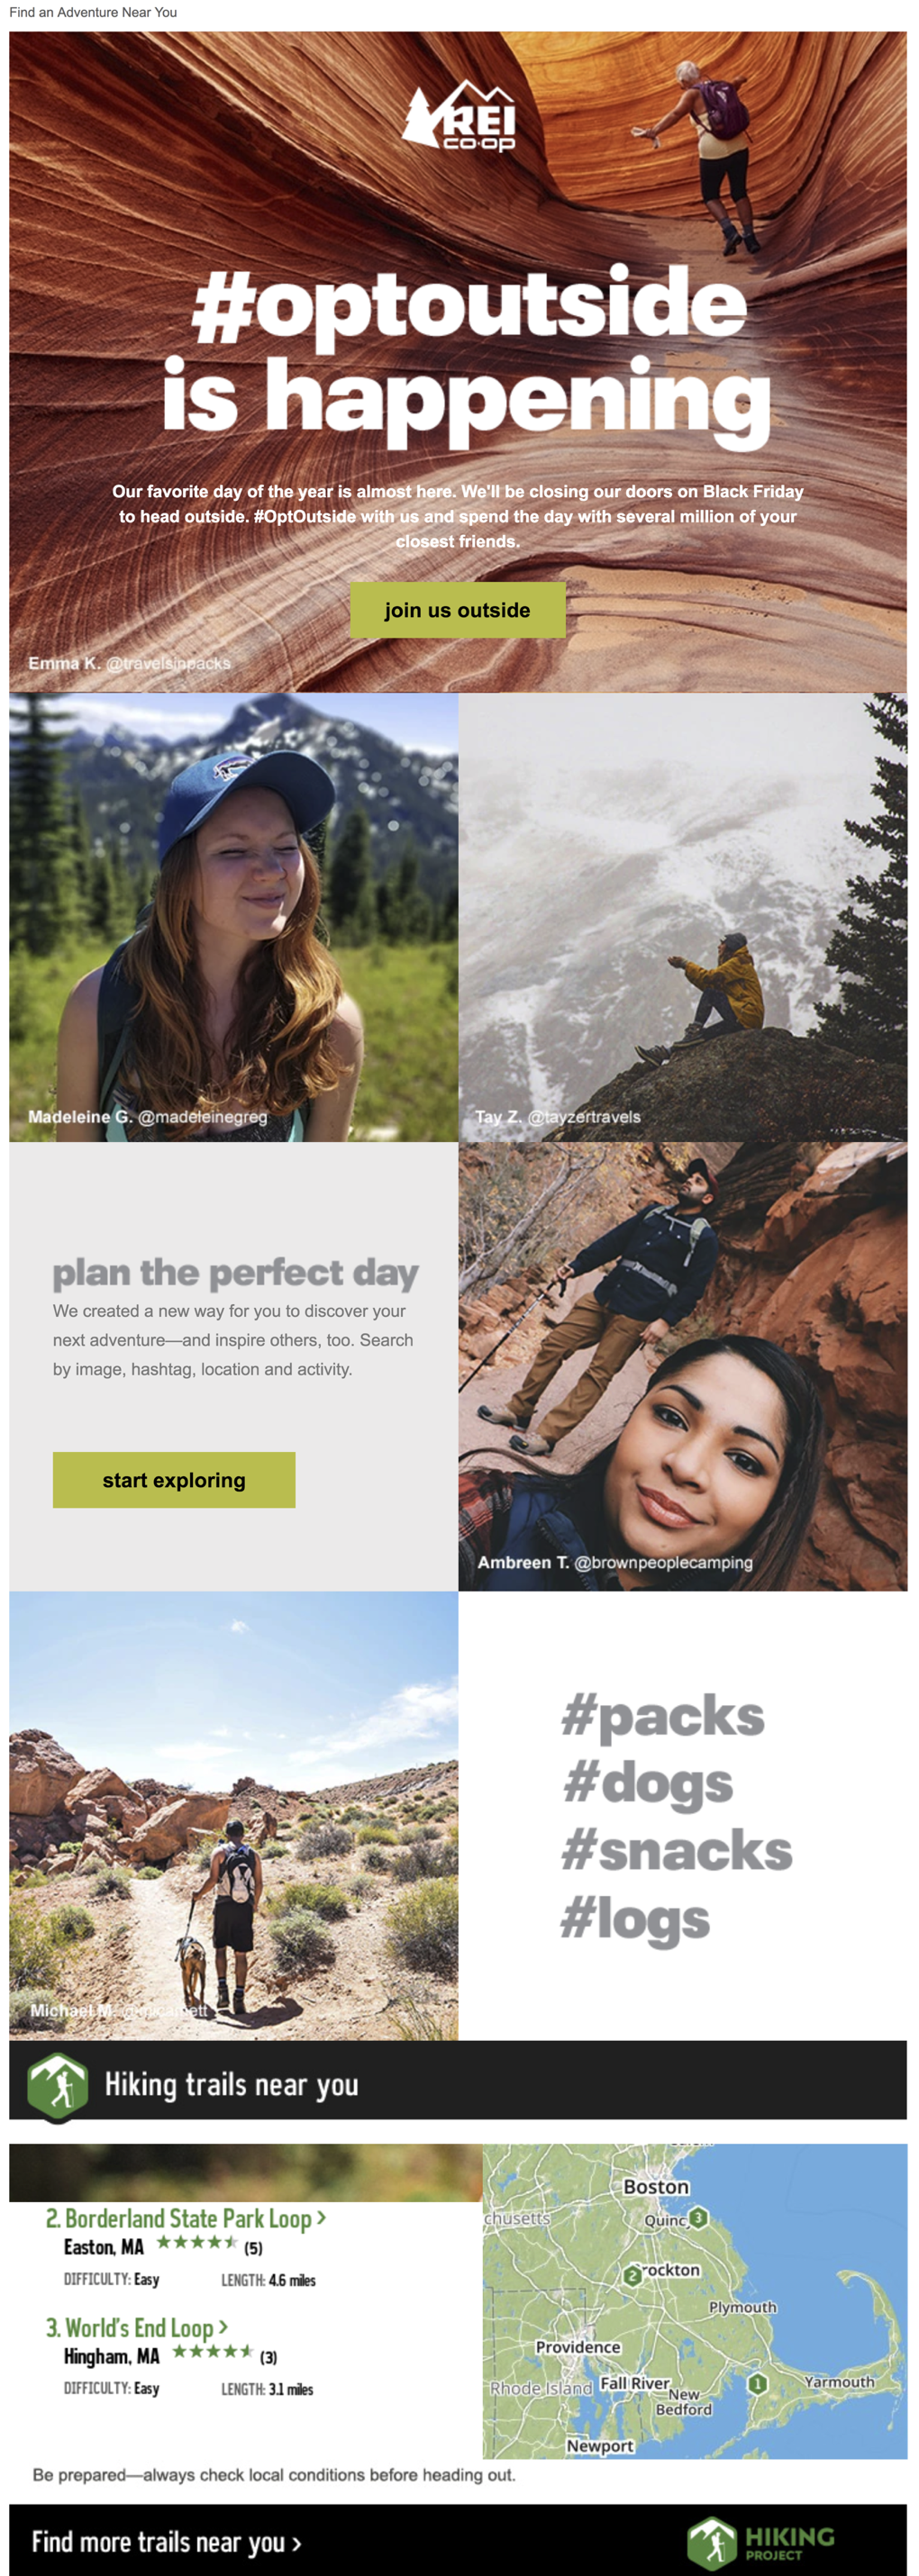 Instead of inundating customers with Black Friday emails, REI sends one campaign encouraging them to sign off and get outside, away from screens.